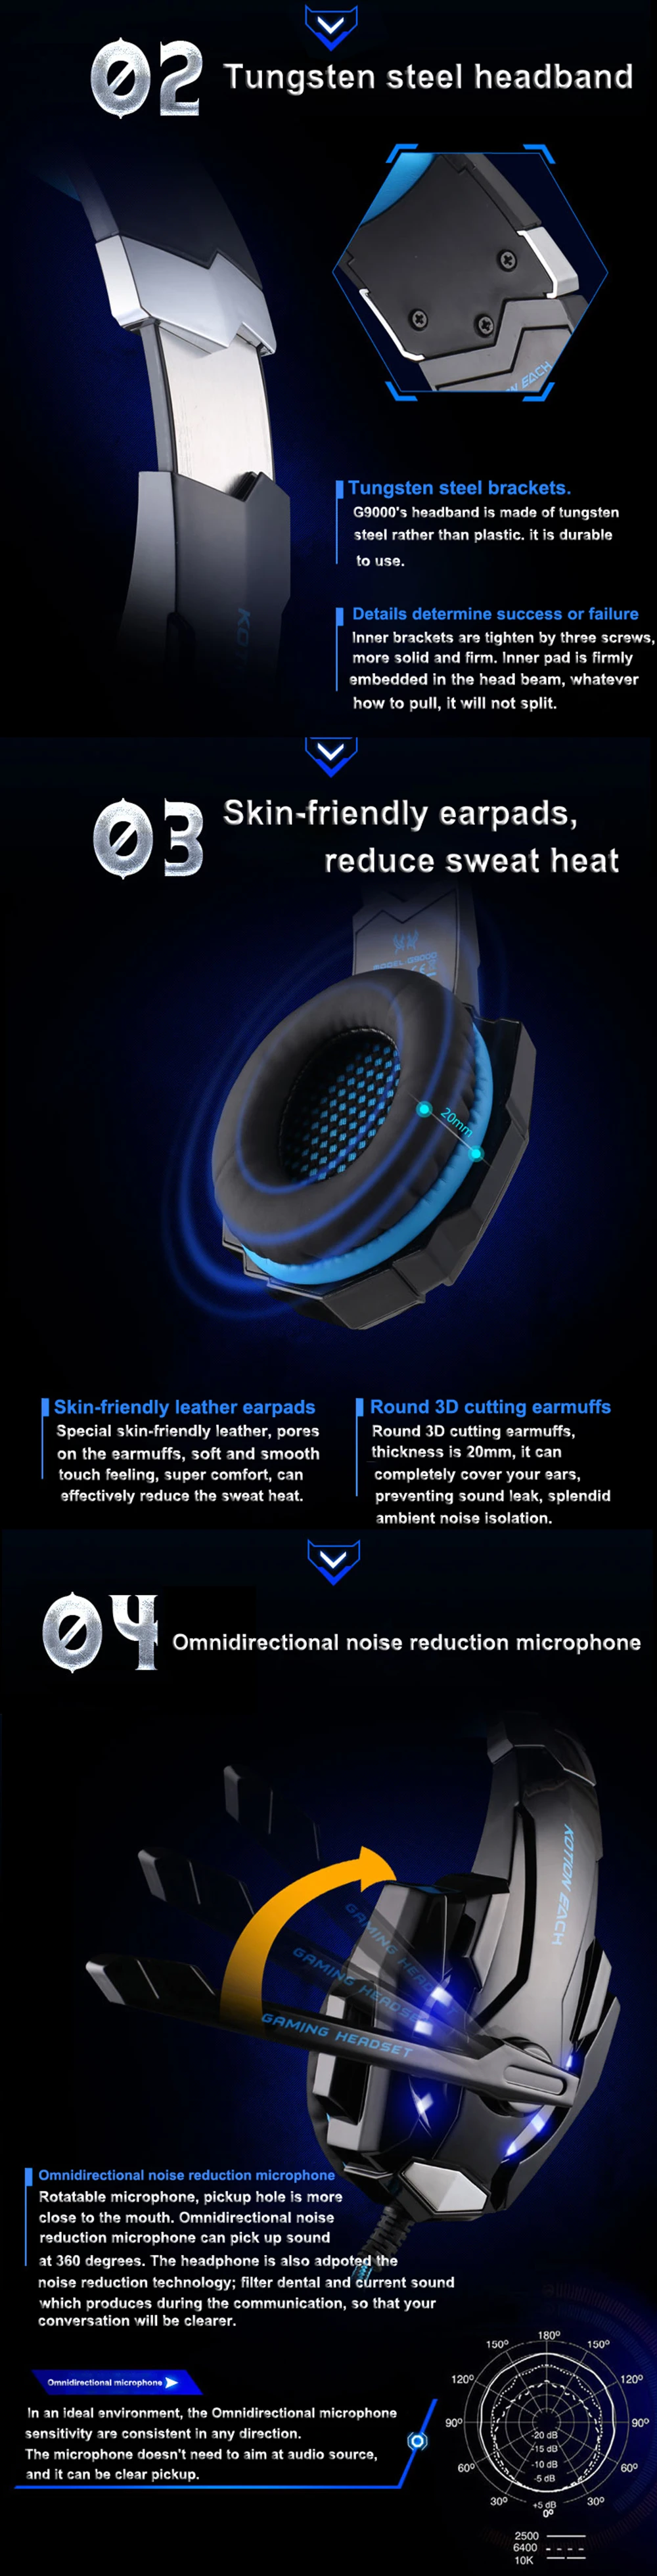 KOTION EACH Gaming Headset game Headphones Deep Bass Stereo Earphone with LED light Microphone mic for PC Laptop PS4 Xbox